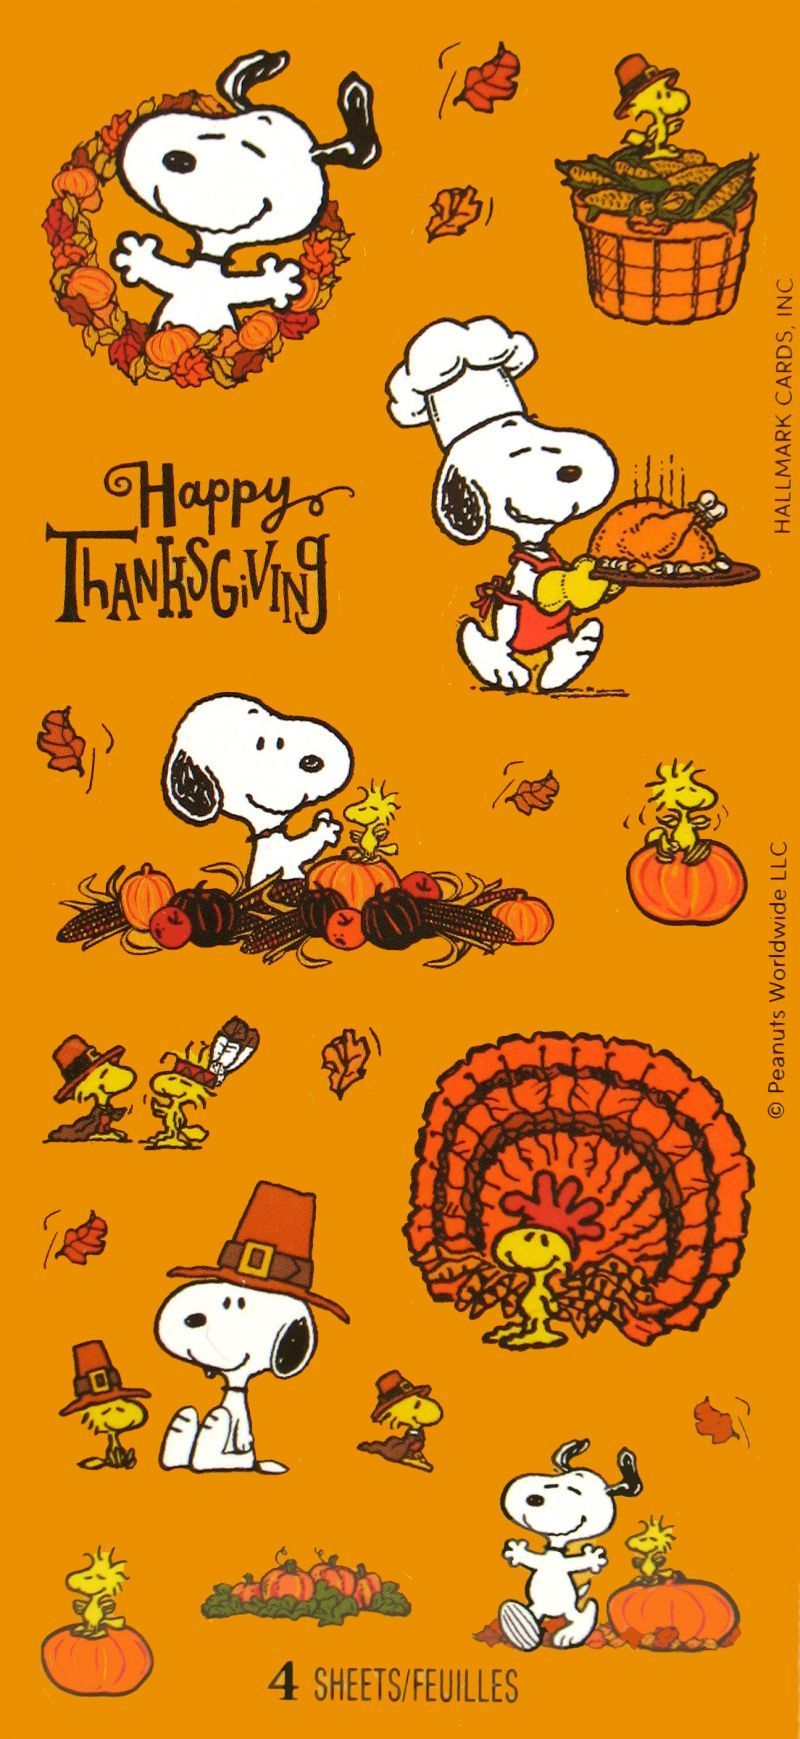 Thanksgiving Wallpaper for mobile phone, tablet, desktop computer and other devices HD and 4K wallpaper. Thanksgiving snoopy, Snoopy wallpaper, Peanuts wallpaper